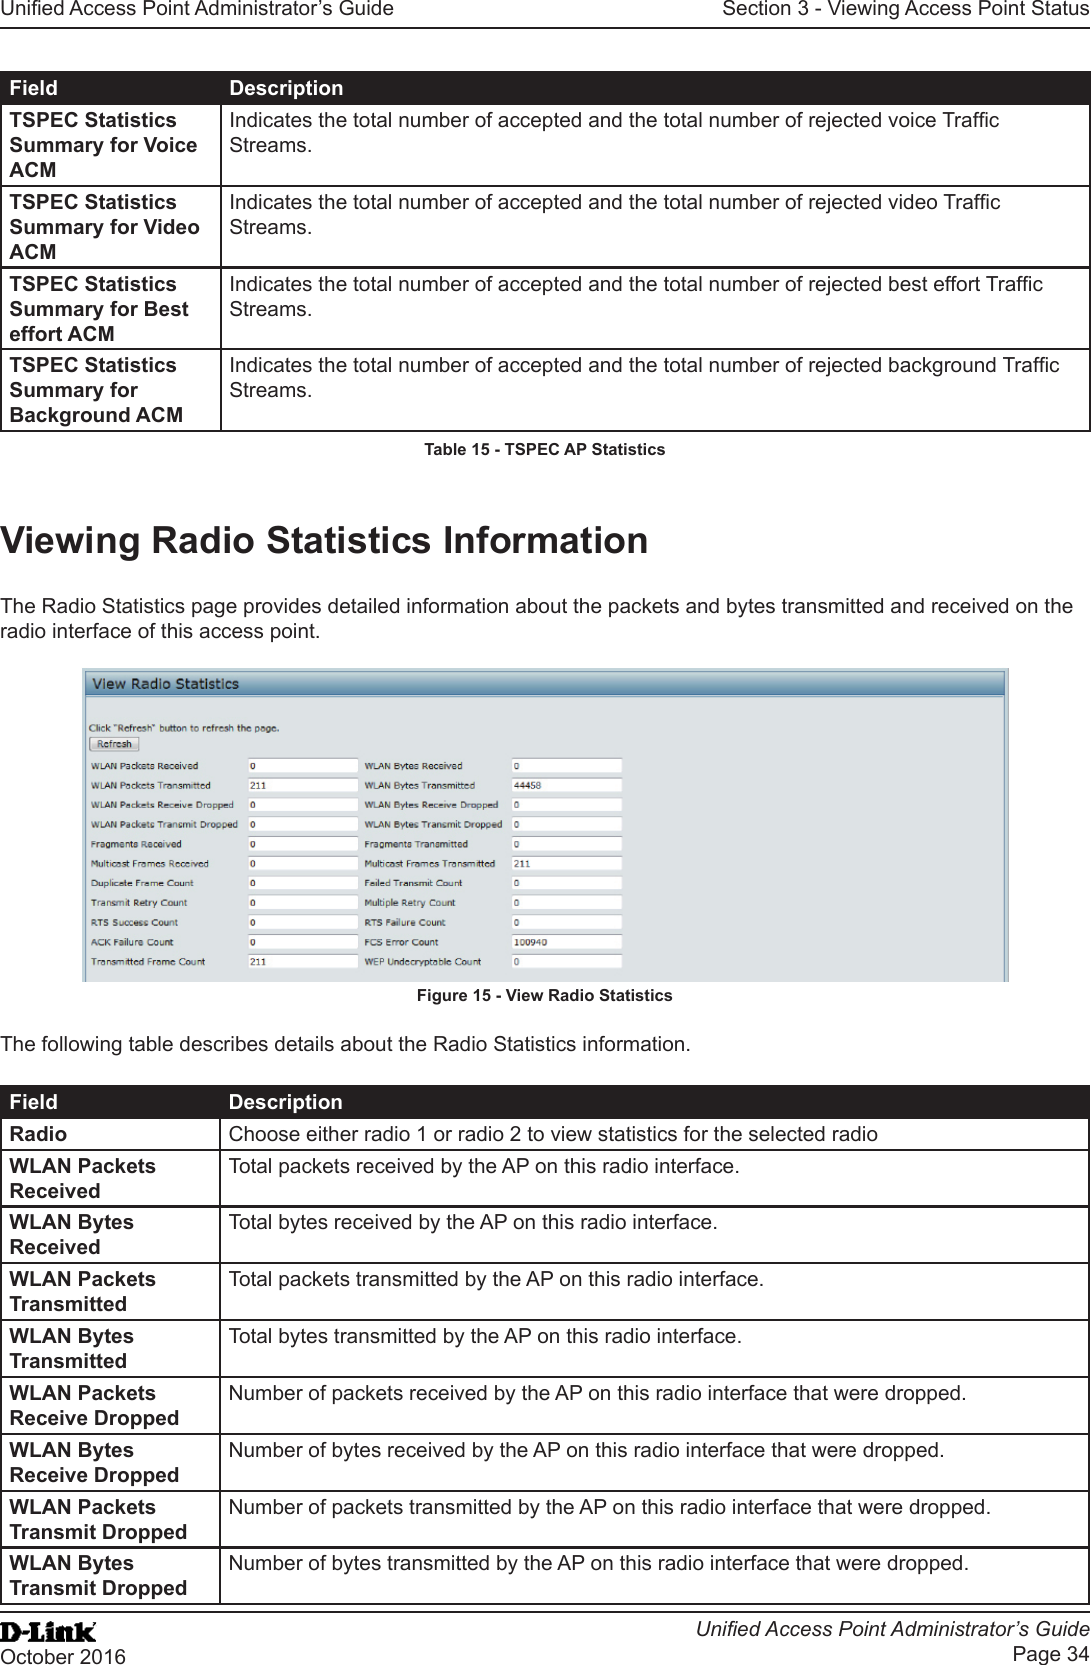 Unied Access Point Administrator’s GuideUnied Access Point Administrator’s GuidePage 34October 2016Section 3 - Viewing Access Point StatusField DescriptionTSPEC Statistics Summary for Voice ACMIndicates the total number of accepted and the total number of rejected voice Trafc Streams.TSPEC Statistics Summary for Video ACMIndicates the total number of accepted and the total number of rejected video Trafc Streams.TSPEC Statistics Summary for Best effort ACMIndicates the total number of accepted and the total number of rejected best effort Trafc Streams.TSPEC Statistics Summary for Background ACMIndicates the total number of accepted and the total number of rejected background Trafc Streams.Table 15 - TSPEC AP StatisticsViewing Radio Statistics InformationThe Radio Statistics page provides detailed information about the packets and bytes transmitted and received on the radio interface of this access point.Figure 15 - View Radio StatisticsThe following table describes details about the Radio Statistics information.Field DescriptionRadio Choose either radio 1 or radio 2 to view statistics for the selected radioWLAN Packets ReceivedTotal packets received by the AP on this radio interface.WLAN Bytes ReceivedTotal bytes received by the AP on this radio interface.WLAN Packets TransmittedTotal packets transmitted by the AP on this radio interface.WLAN Bytes TransmittedTotal bytes transmitted by the AP on this radio interface.WLAN Packets Receive DroppedNumber of packets received by the AP on this radio interface that were dropped.WLAN Bytes Receive DroppedNumber of bytes received by the AP on this radio interface that were dropped.WLAN Packets Transmit DroppedNumber of packets transmitted by the AP on this radio interface that were dropped.WLAN Bytes Transmit DroppedNumber of bytes transmitted by the AP on this radio interface that were dropped.